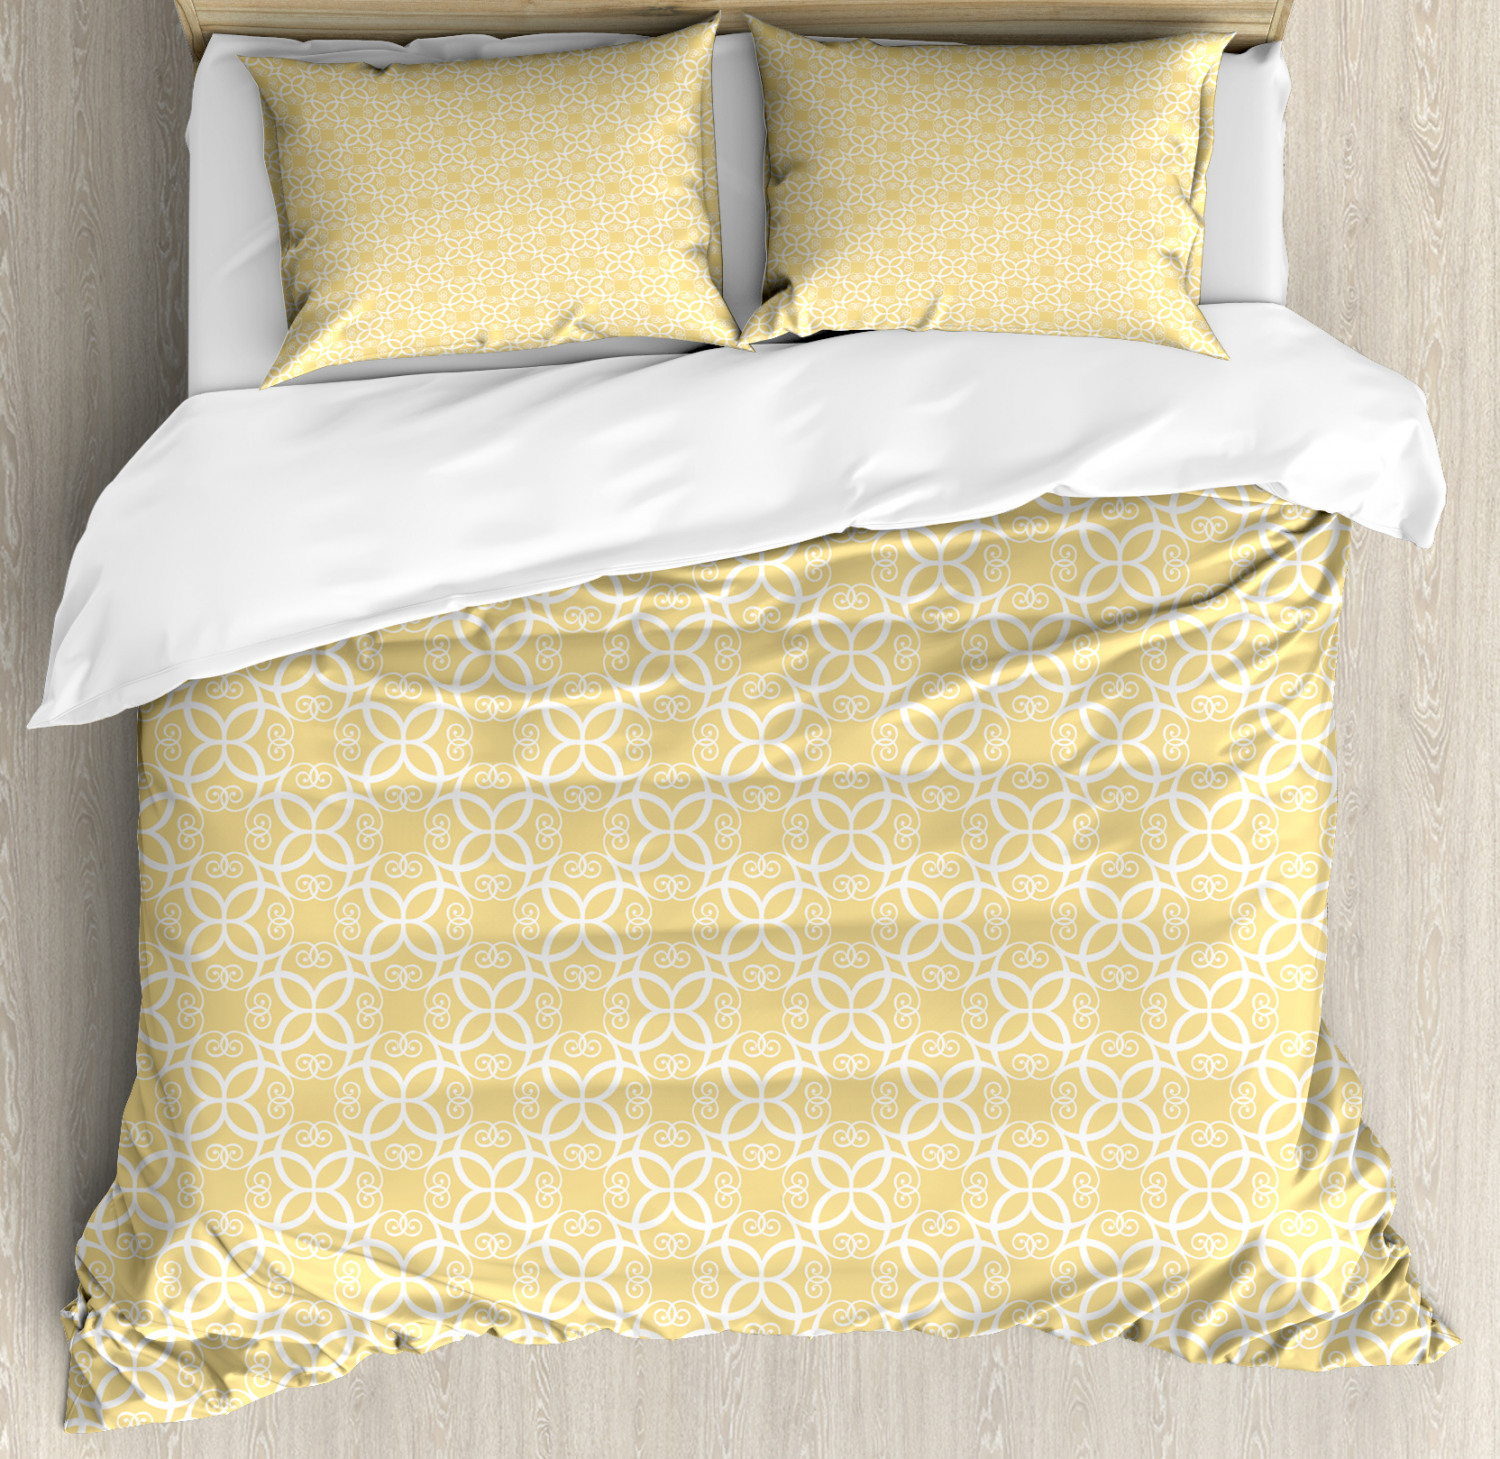 Yellow And White Duvet Cover Set With Pillow Shams Ornate Floral